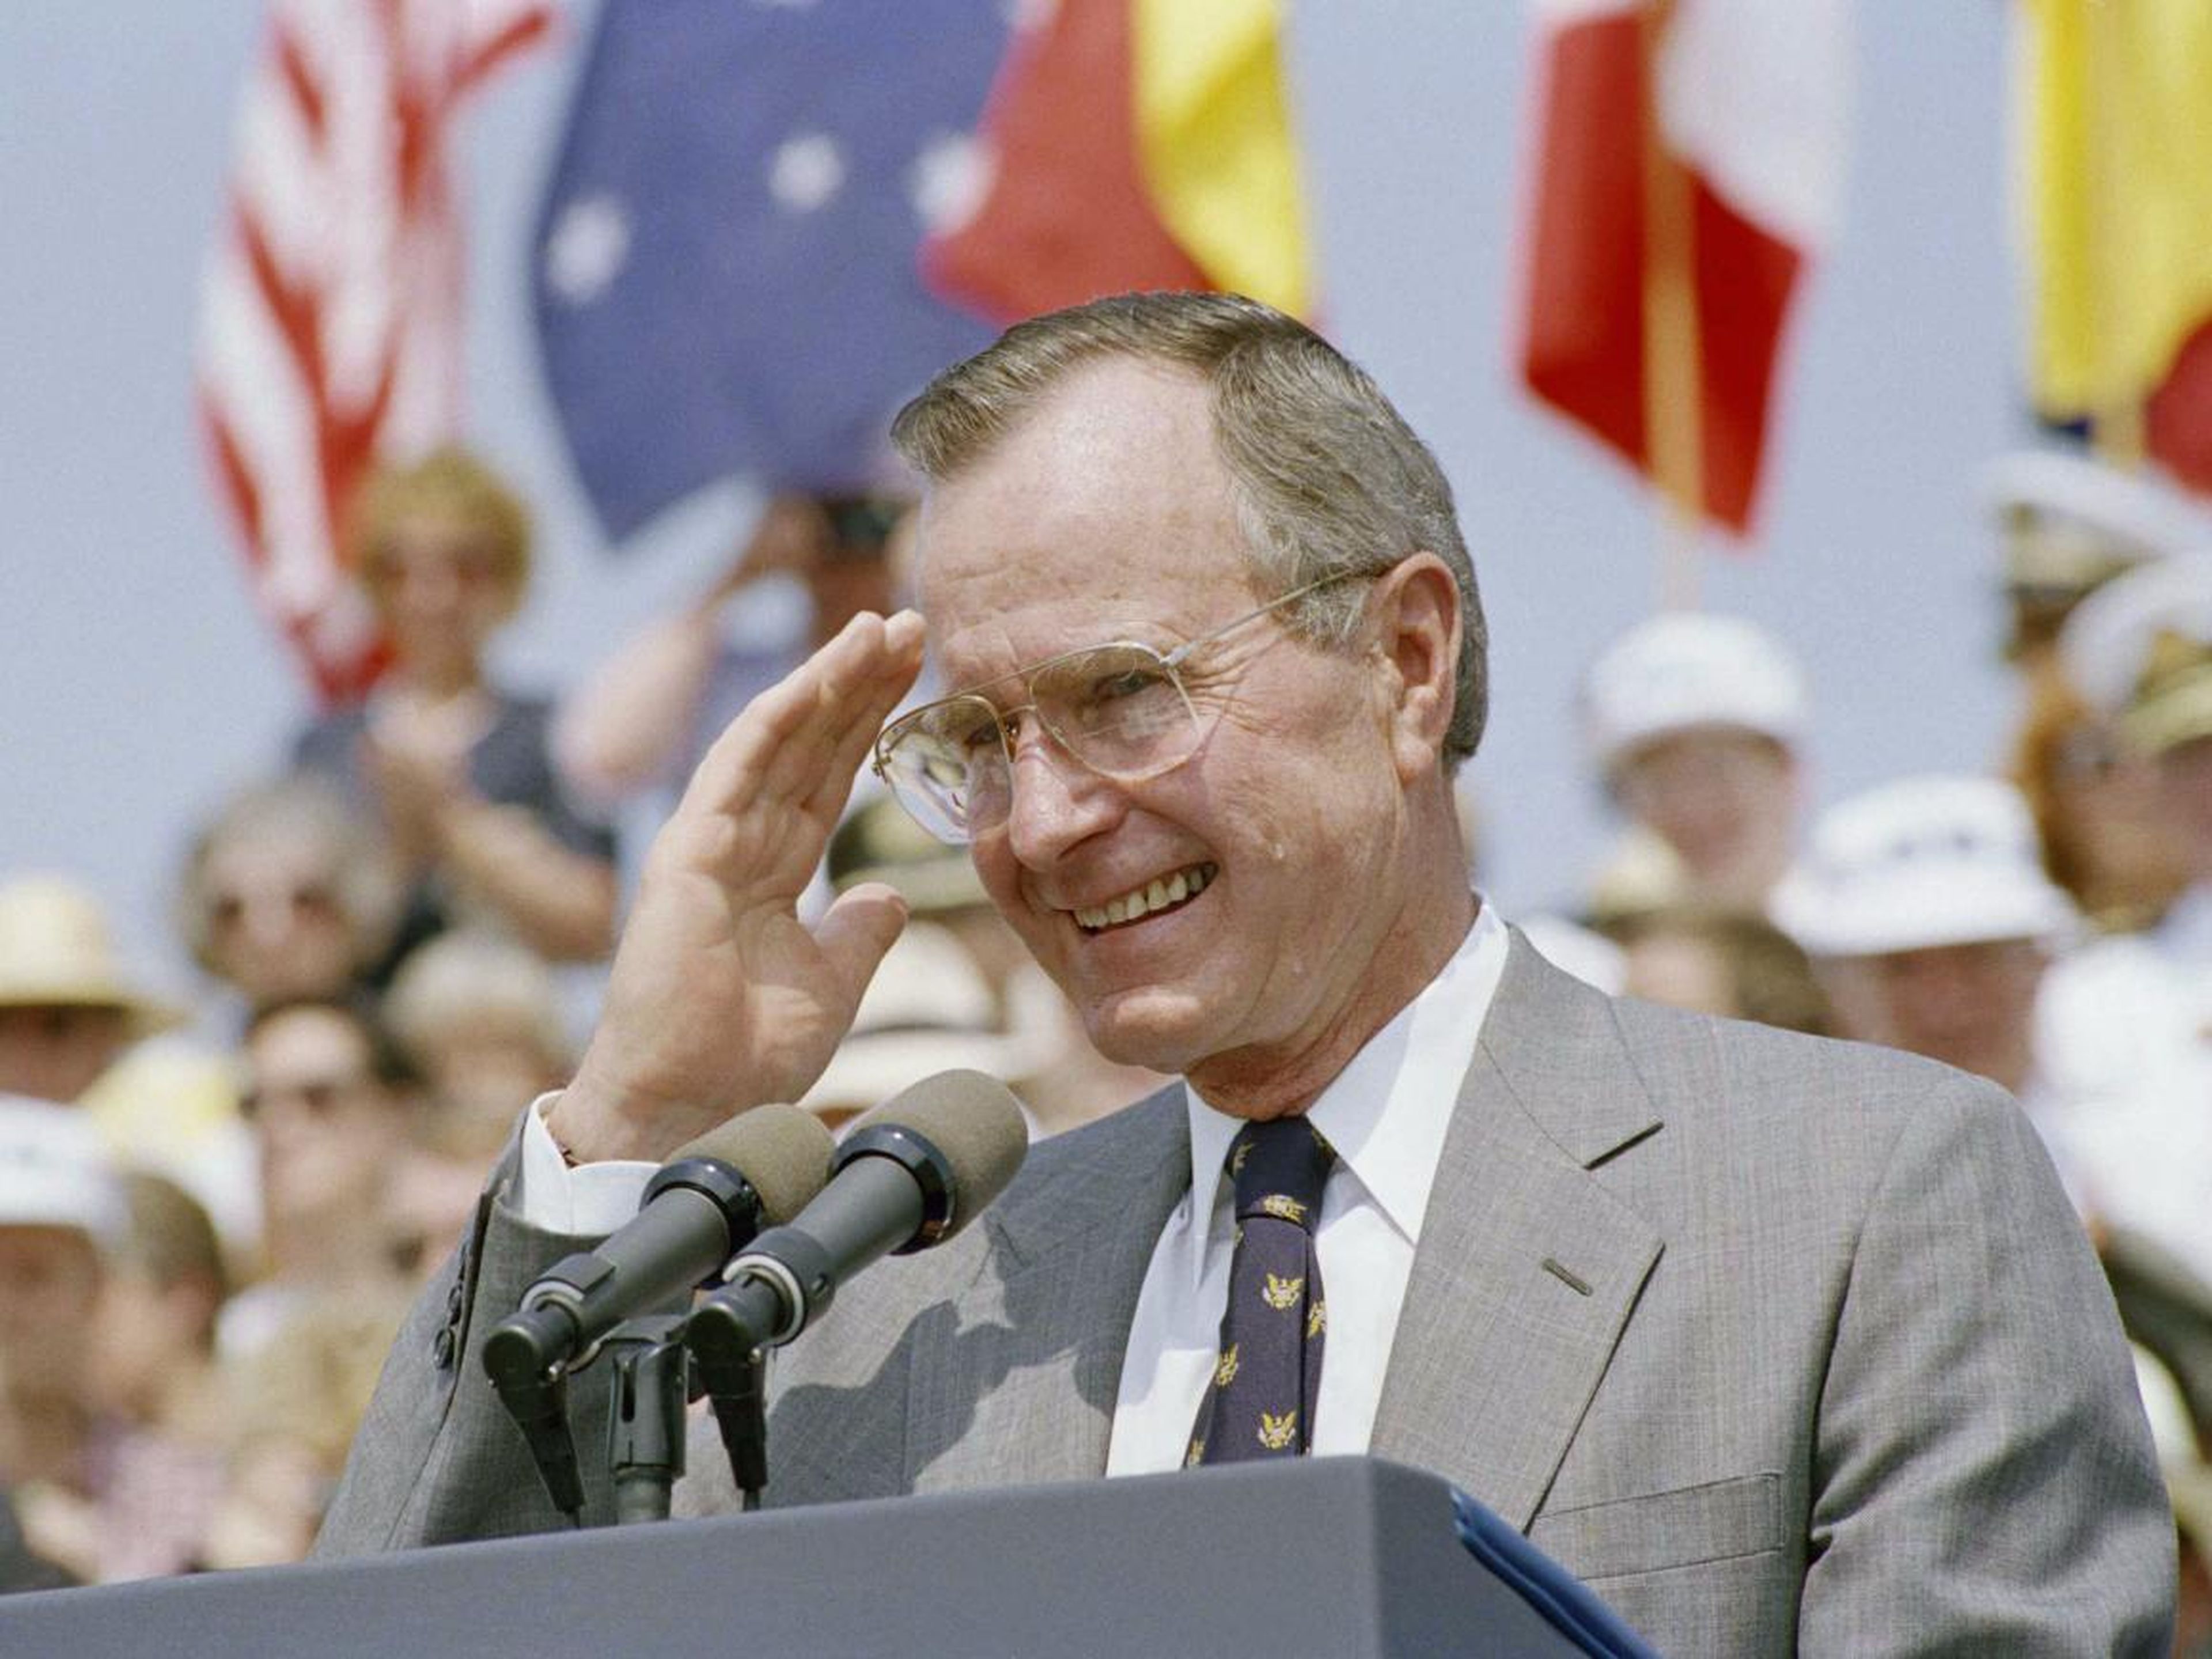 By June 1992, as Bush addressed a crowd of veterans during a ceremony at the Korean War Memorial, several months before losing the presidential election, he looked older.